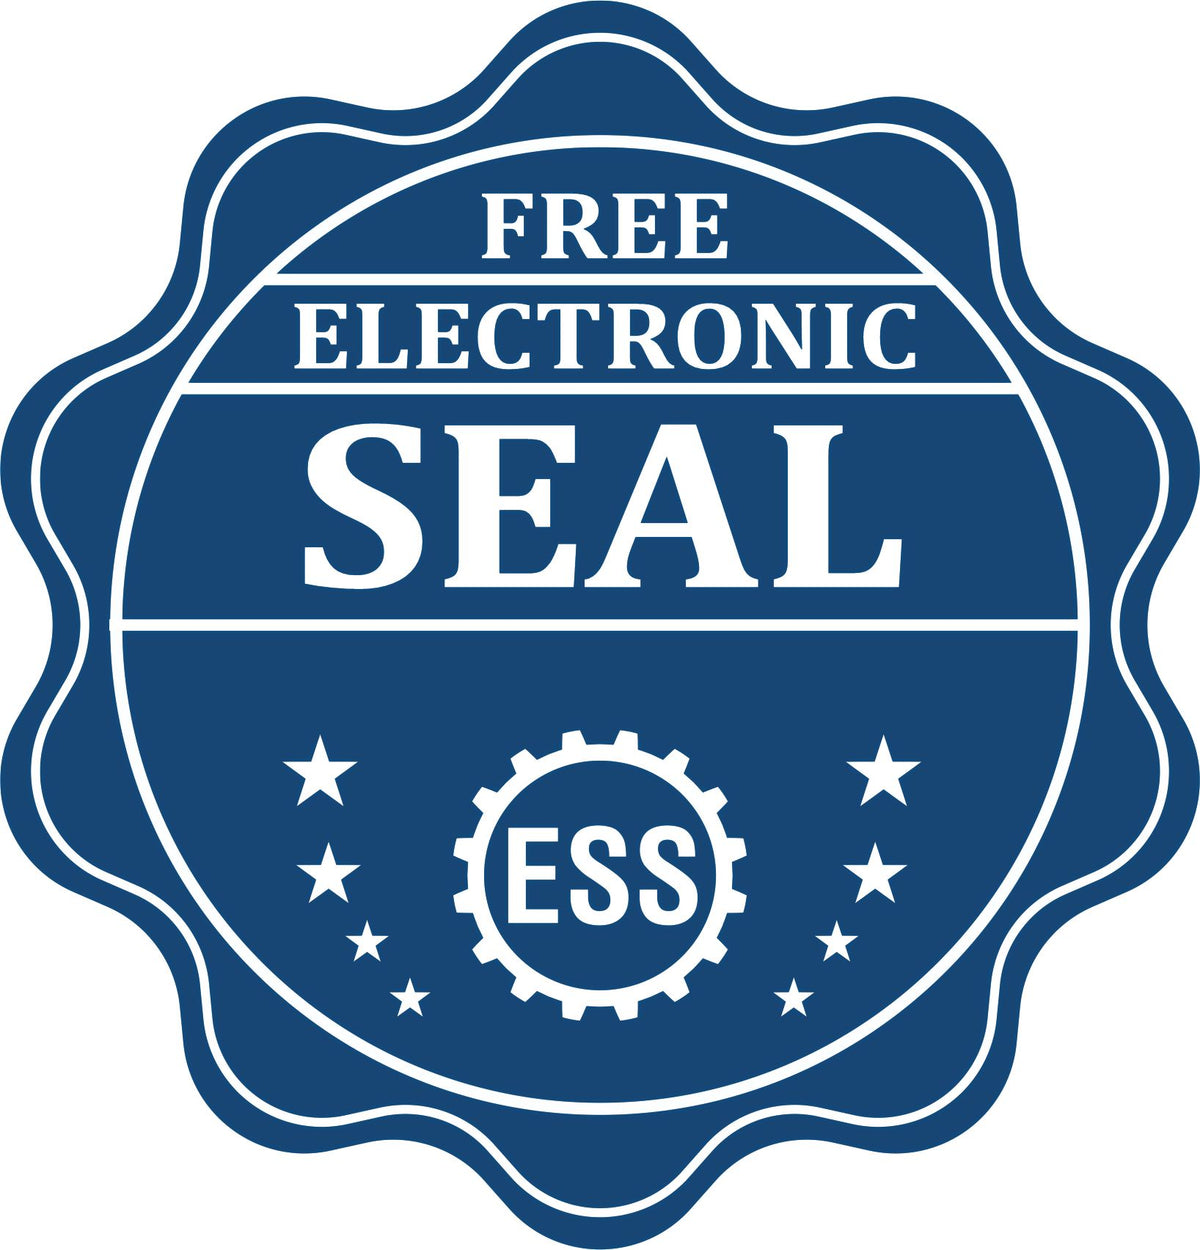 A badge showing a free electronic seal for the Gift Idaho Landscape Architect Seal with stars and the ESS gear on the emblem.